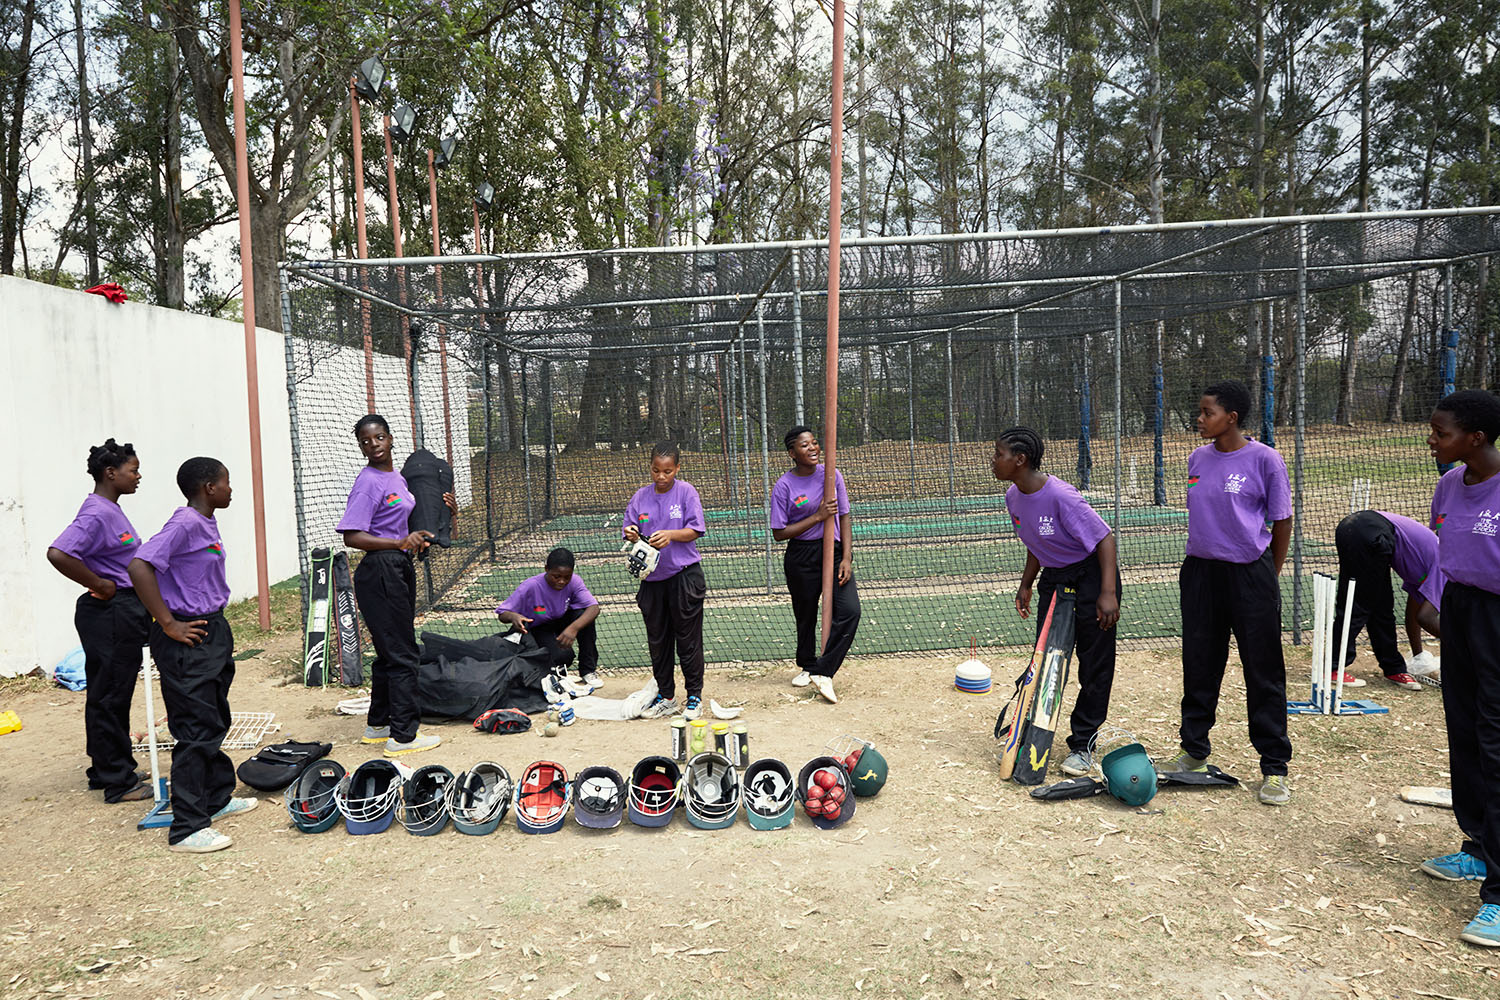 The girls pack away their kits after training